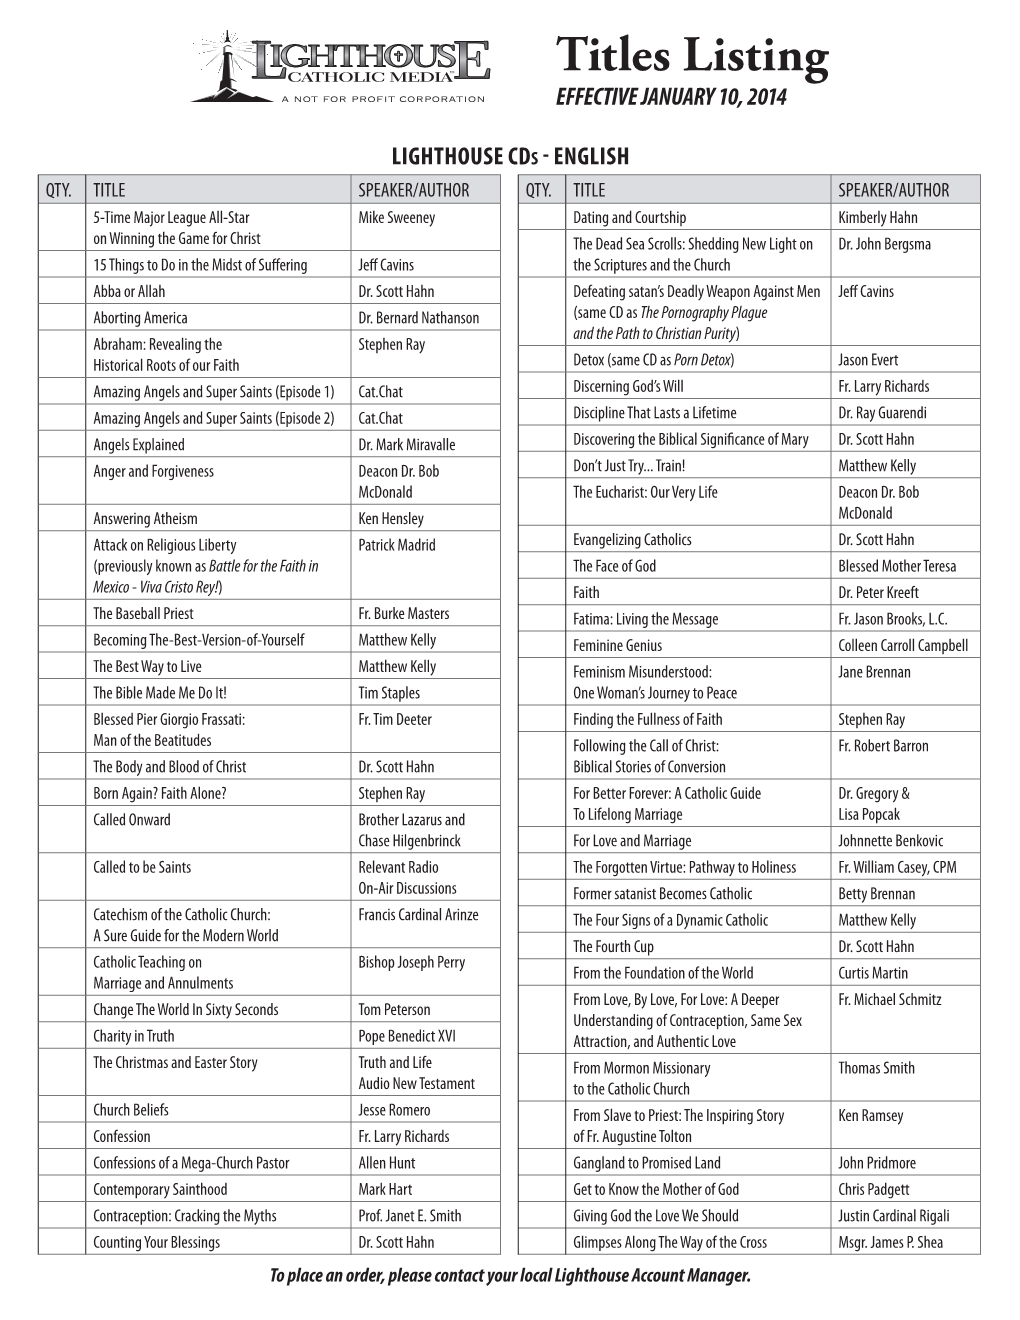 Titles Listing EFFECTIVE JANUARY 10, 2014